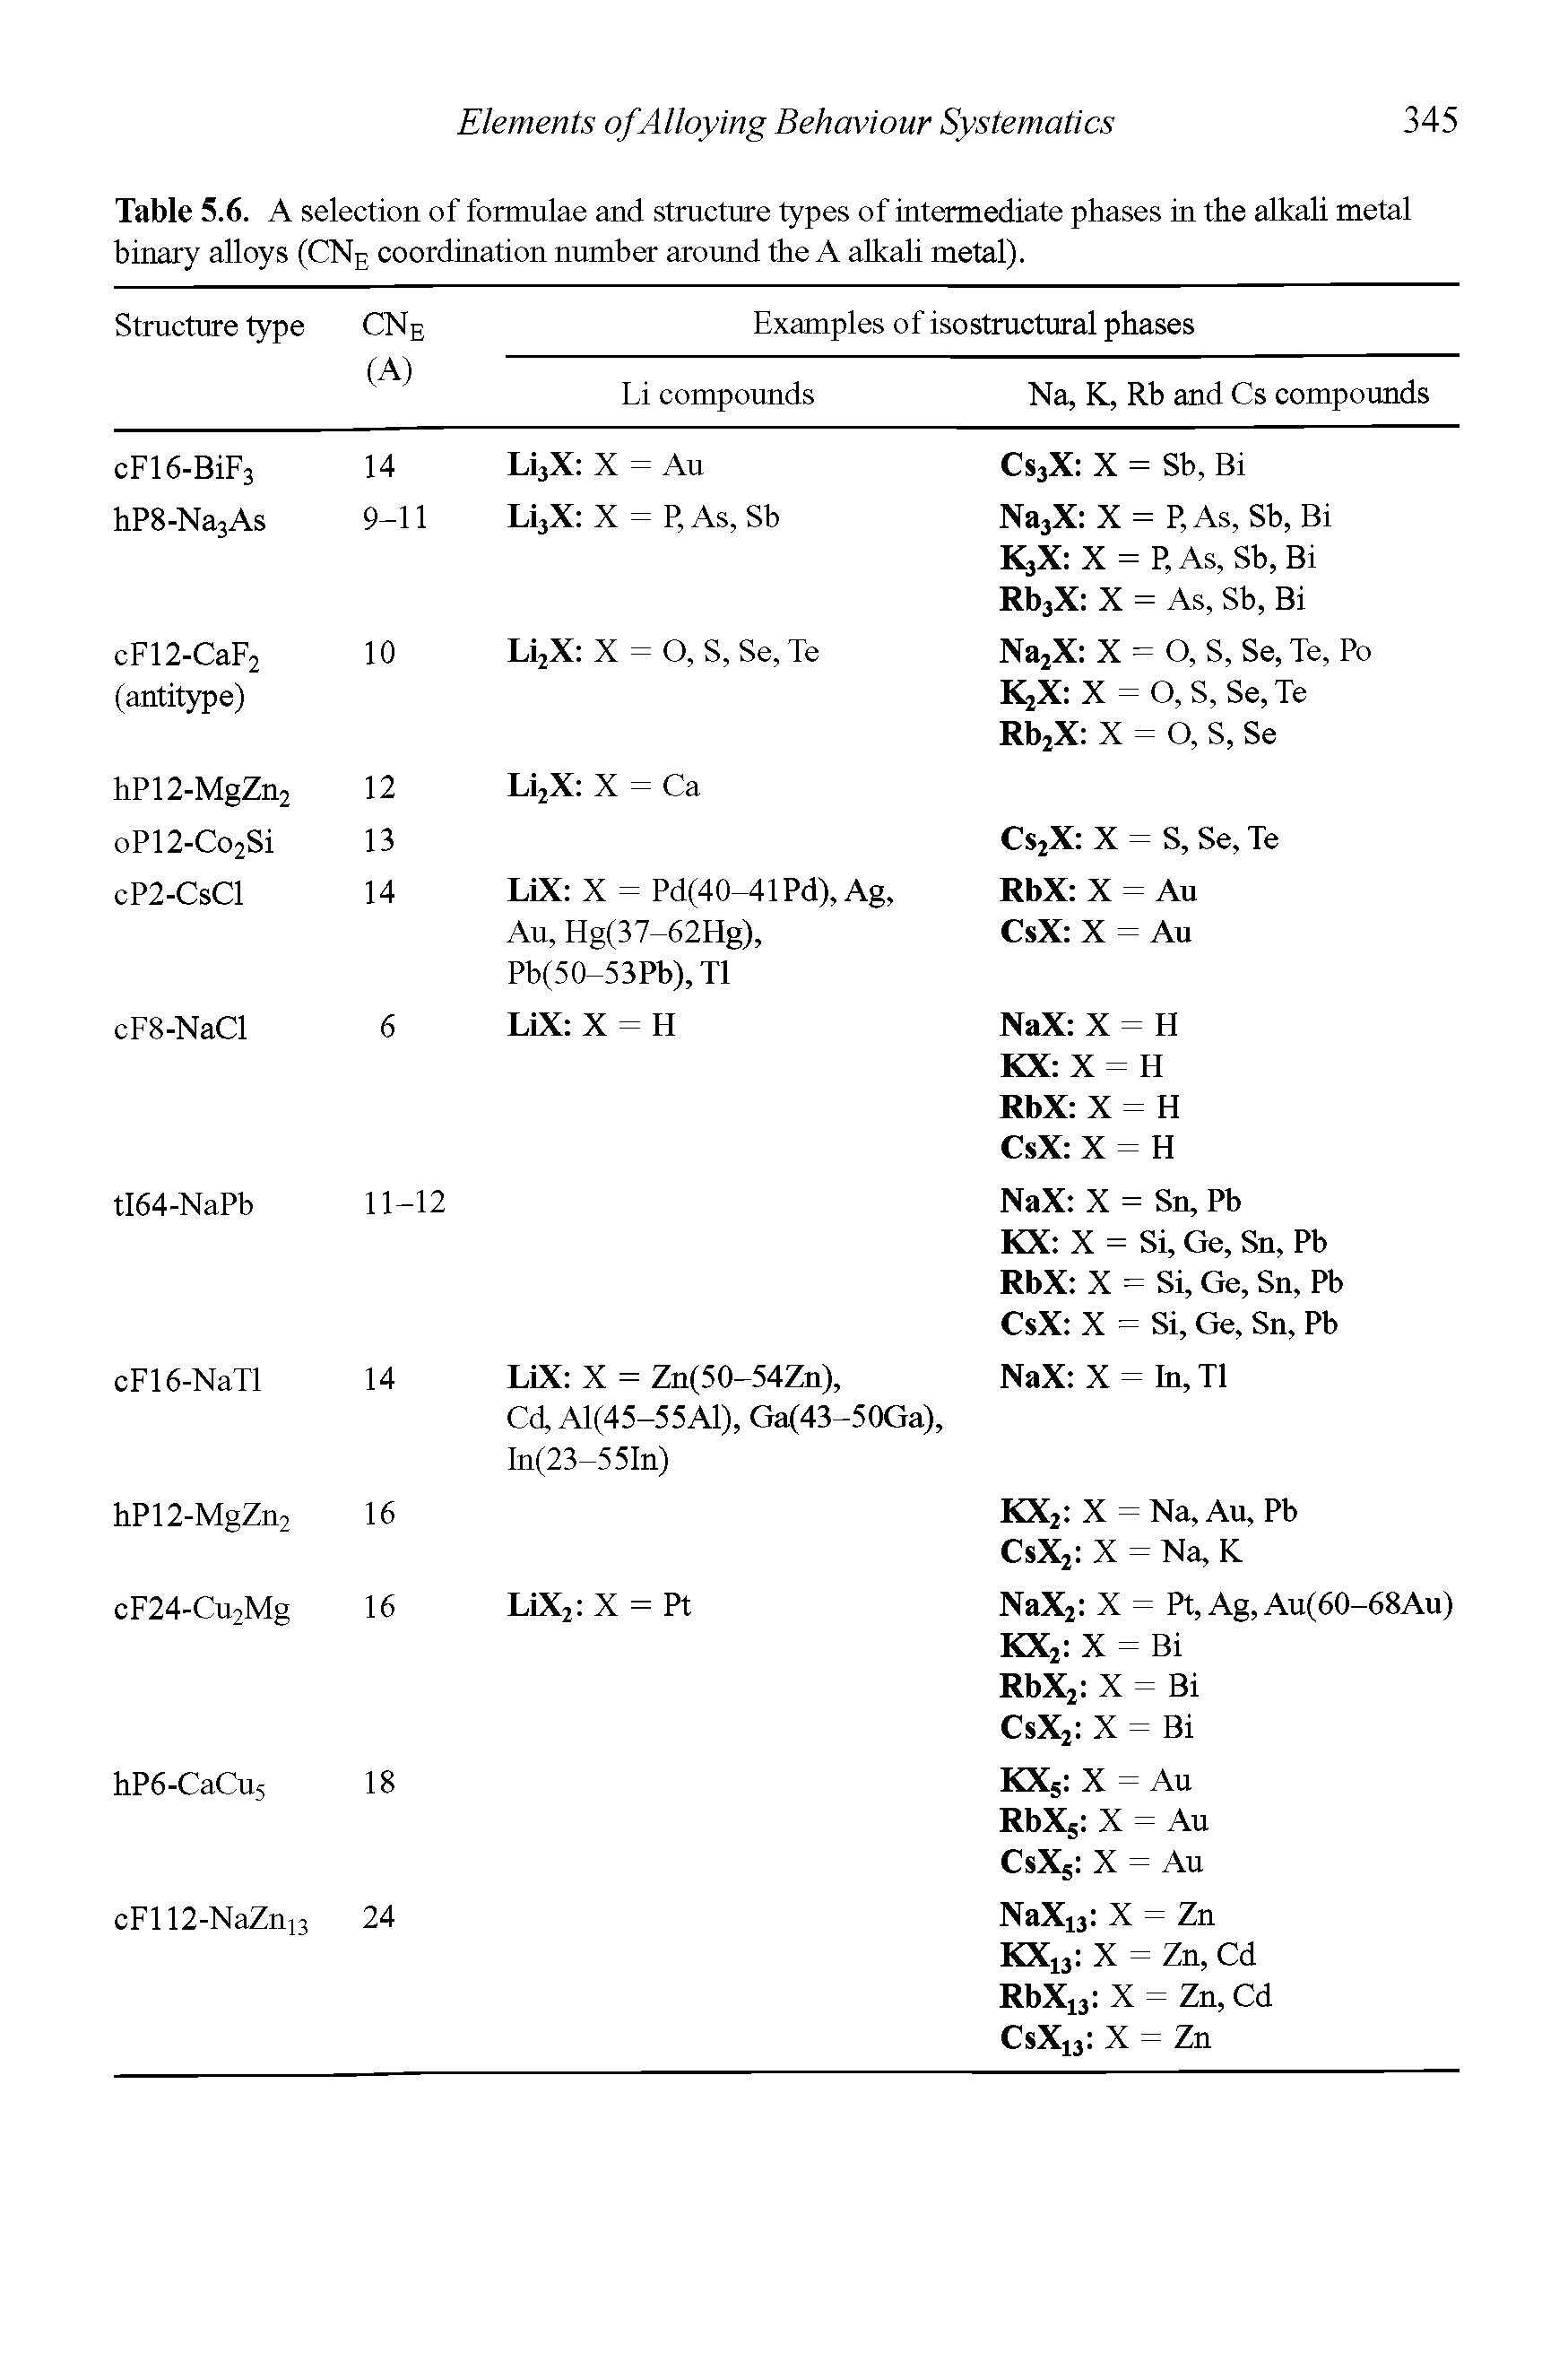 Table 5.6. A selection of formulae and structure types of intermediate phases in the alkali metal binary alloys (CNE coordination number around the A alkali metal).